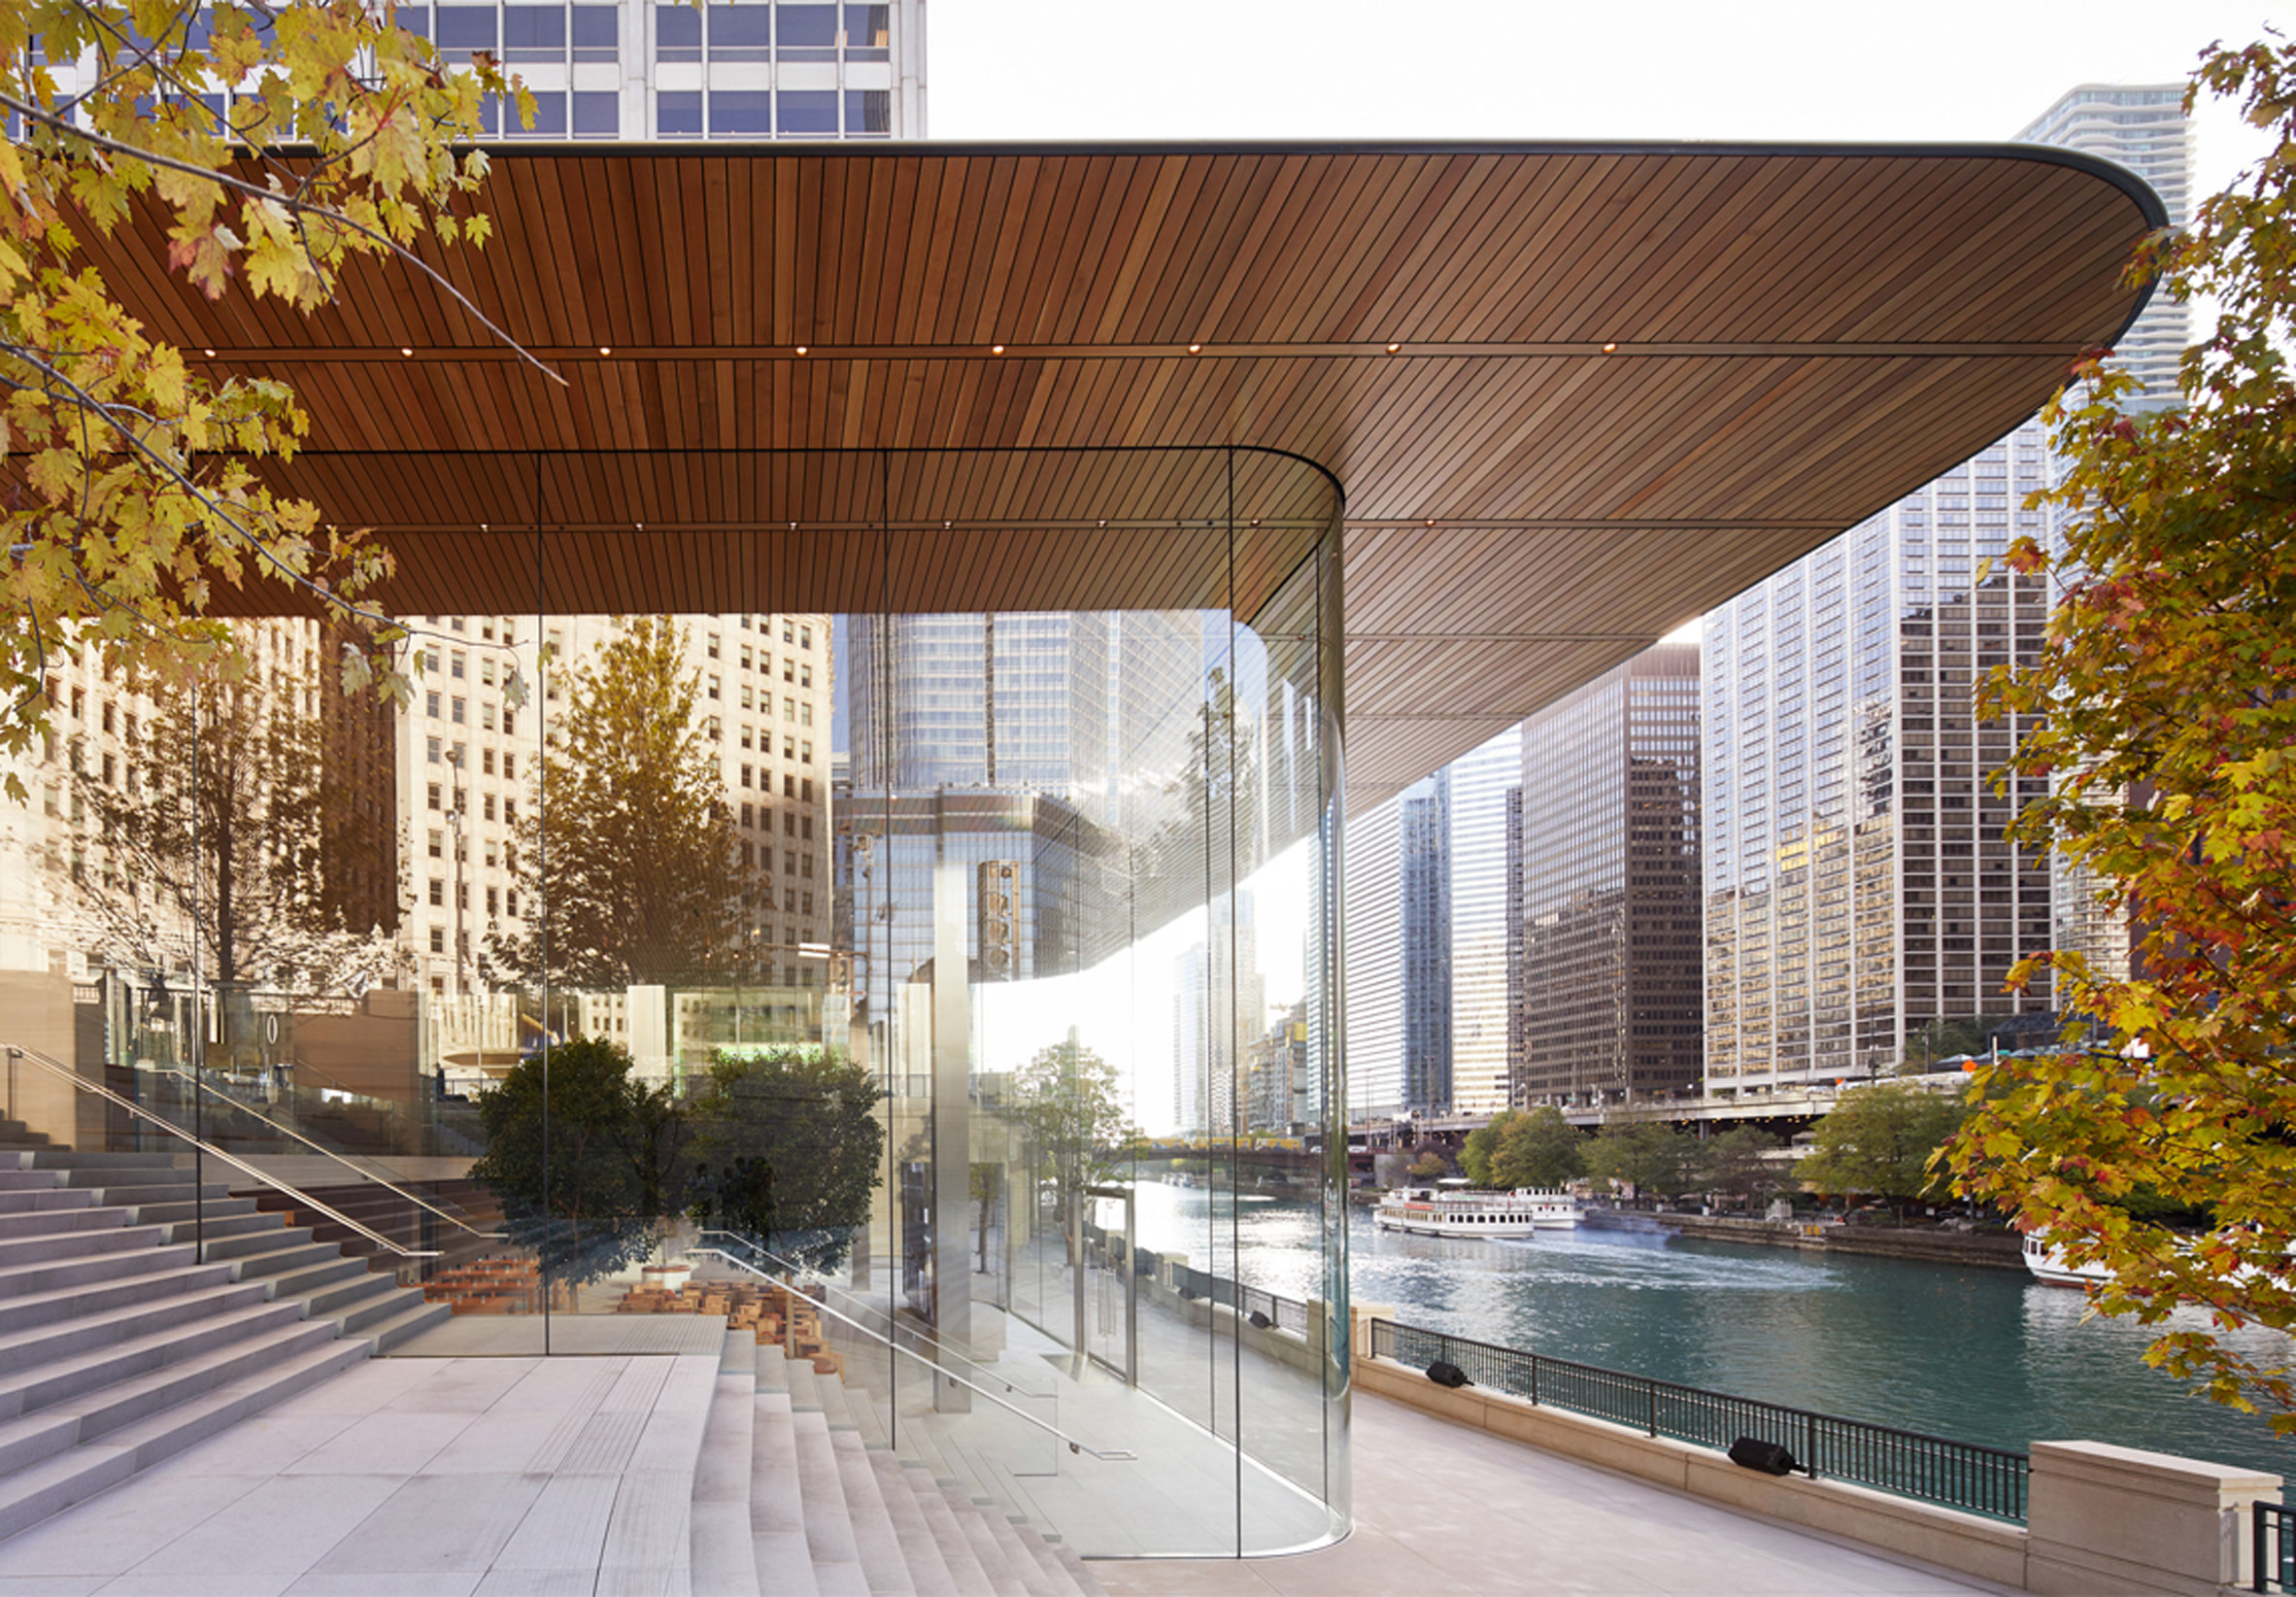 Apple's new Chicago flagship store is more than an architectural marvel  [Gallery] - 9to5Mac